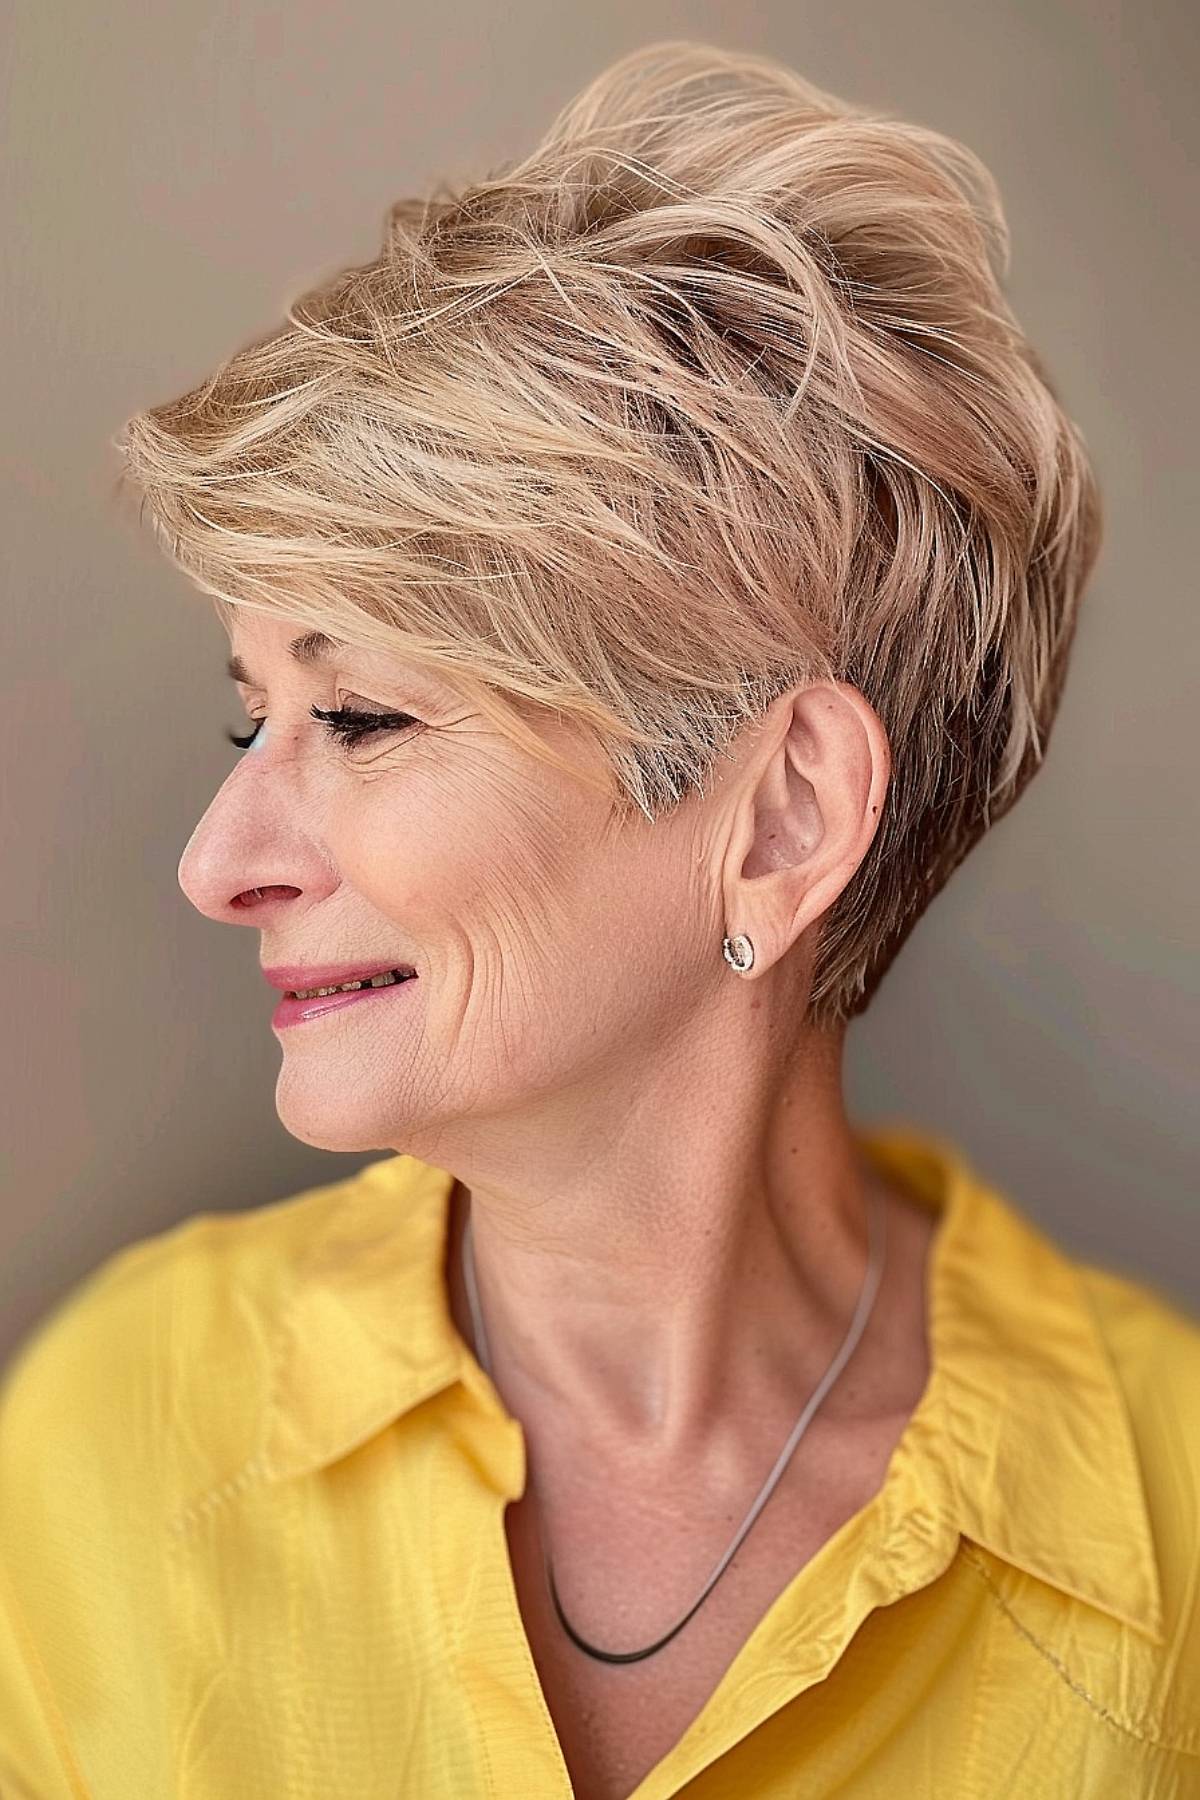 A mature woman with a modern angled pixie cut gives off an elegant and youthful look.